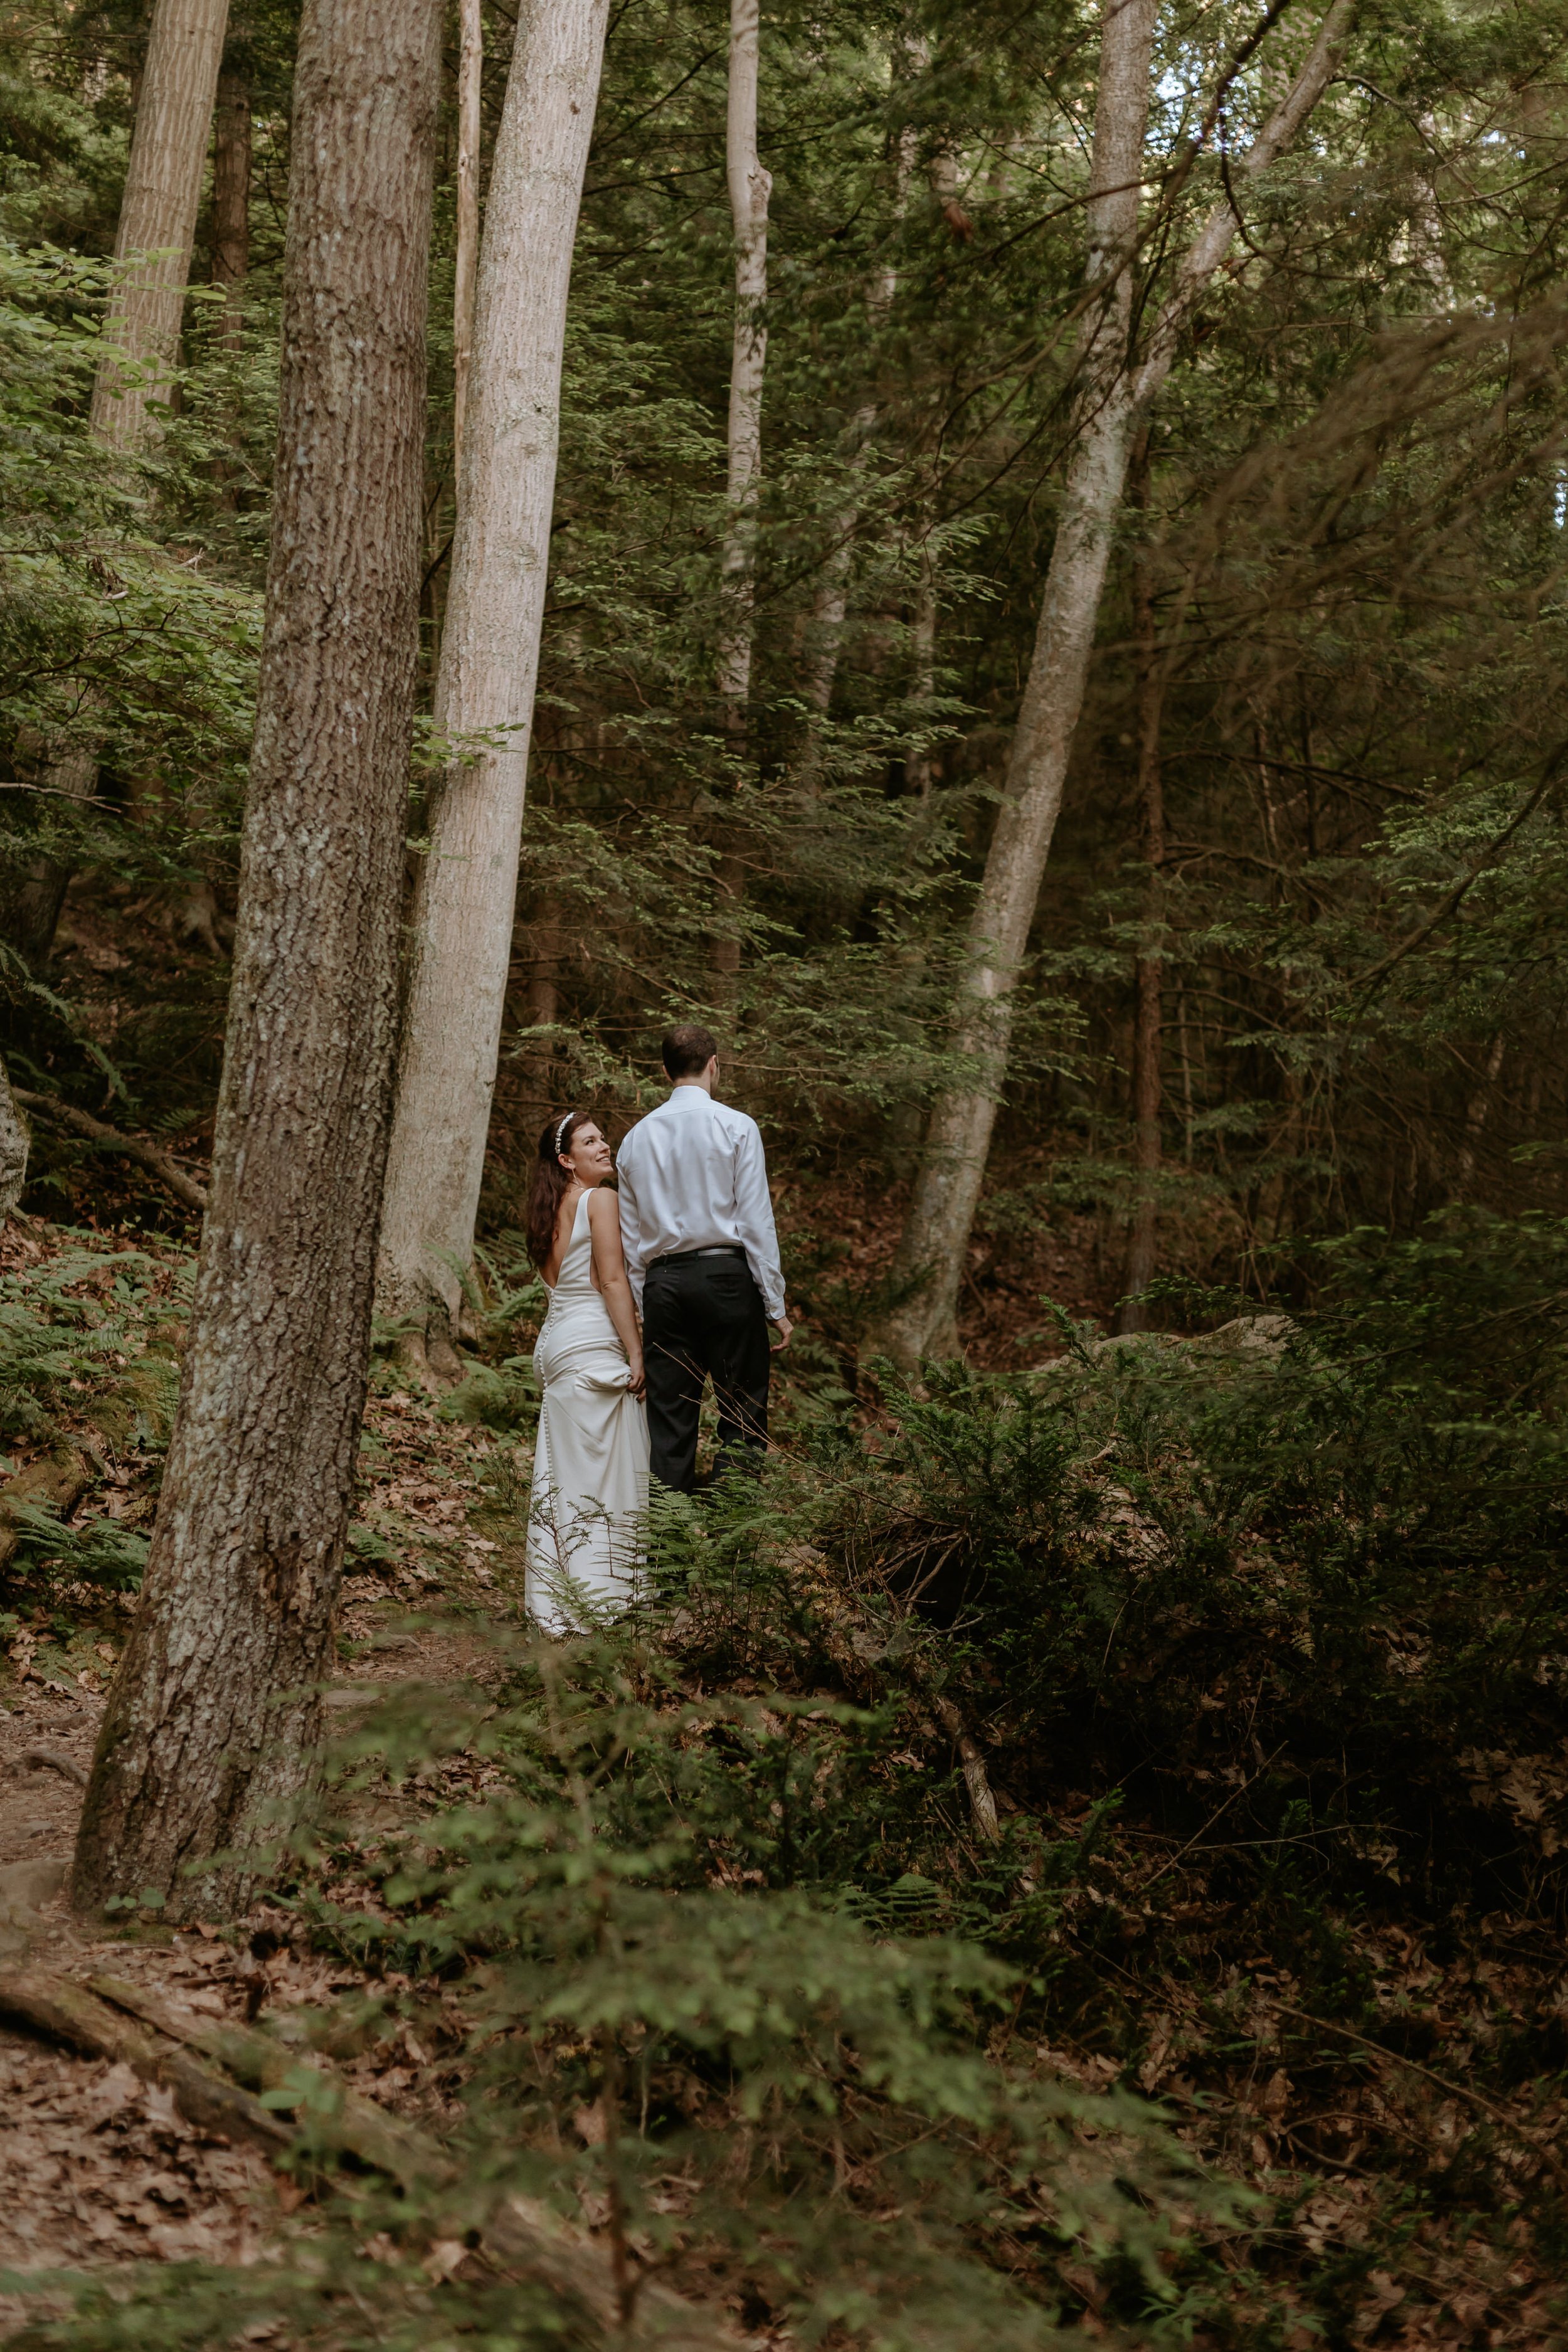 Bride and groom walking in forest together.